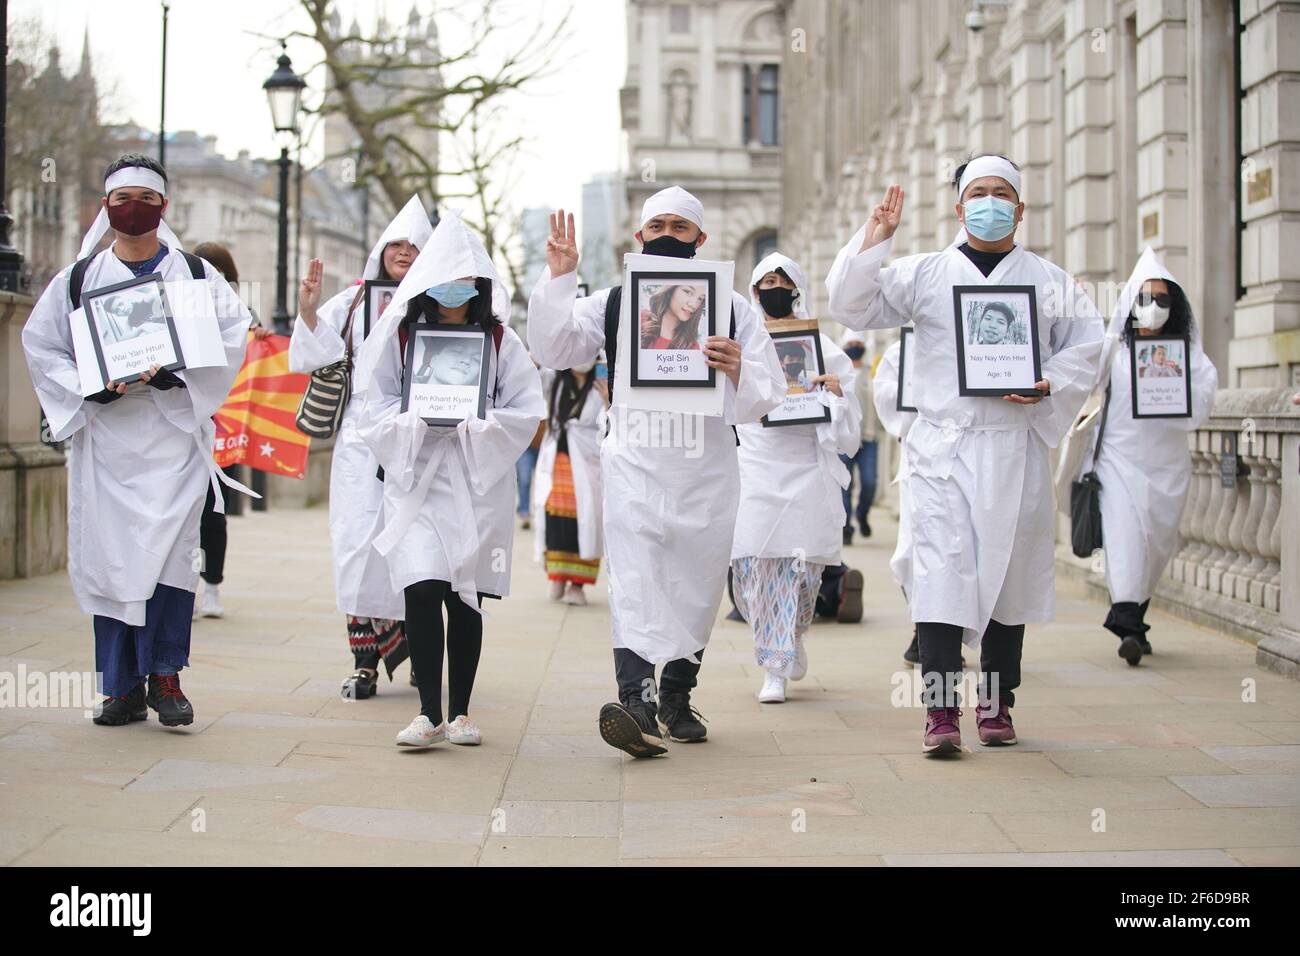 Protesters march in Westminster, central London, demonstrating against the February 1 coup in Myanmar which ousted Aung San Suu Kyi's elected government. Picture date: Wednesday March 31, 2021. Stock Photo